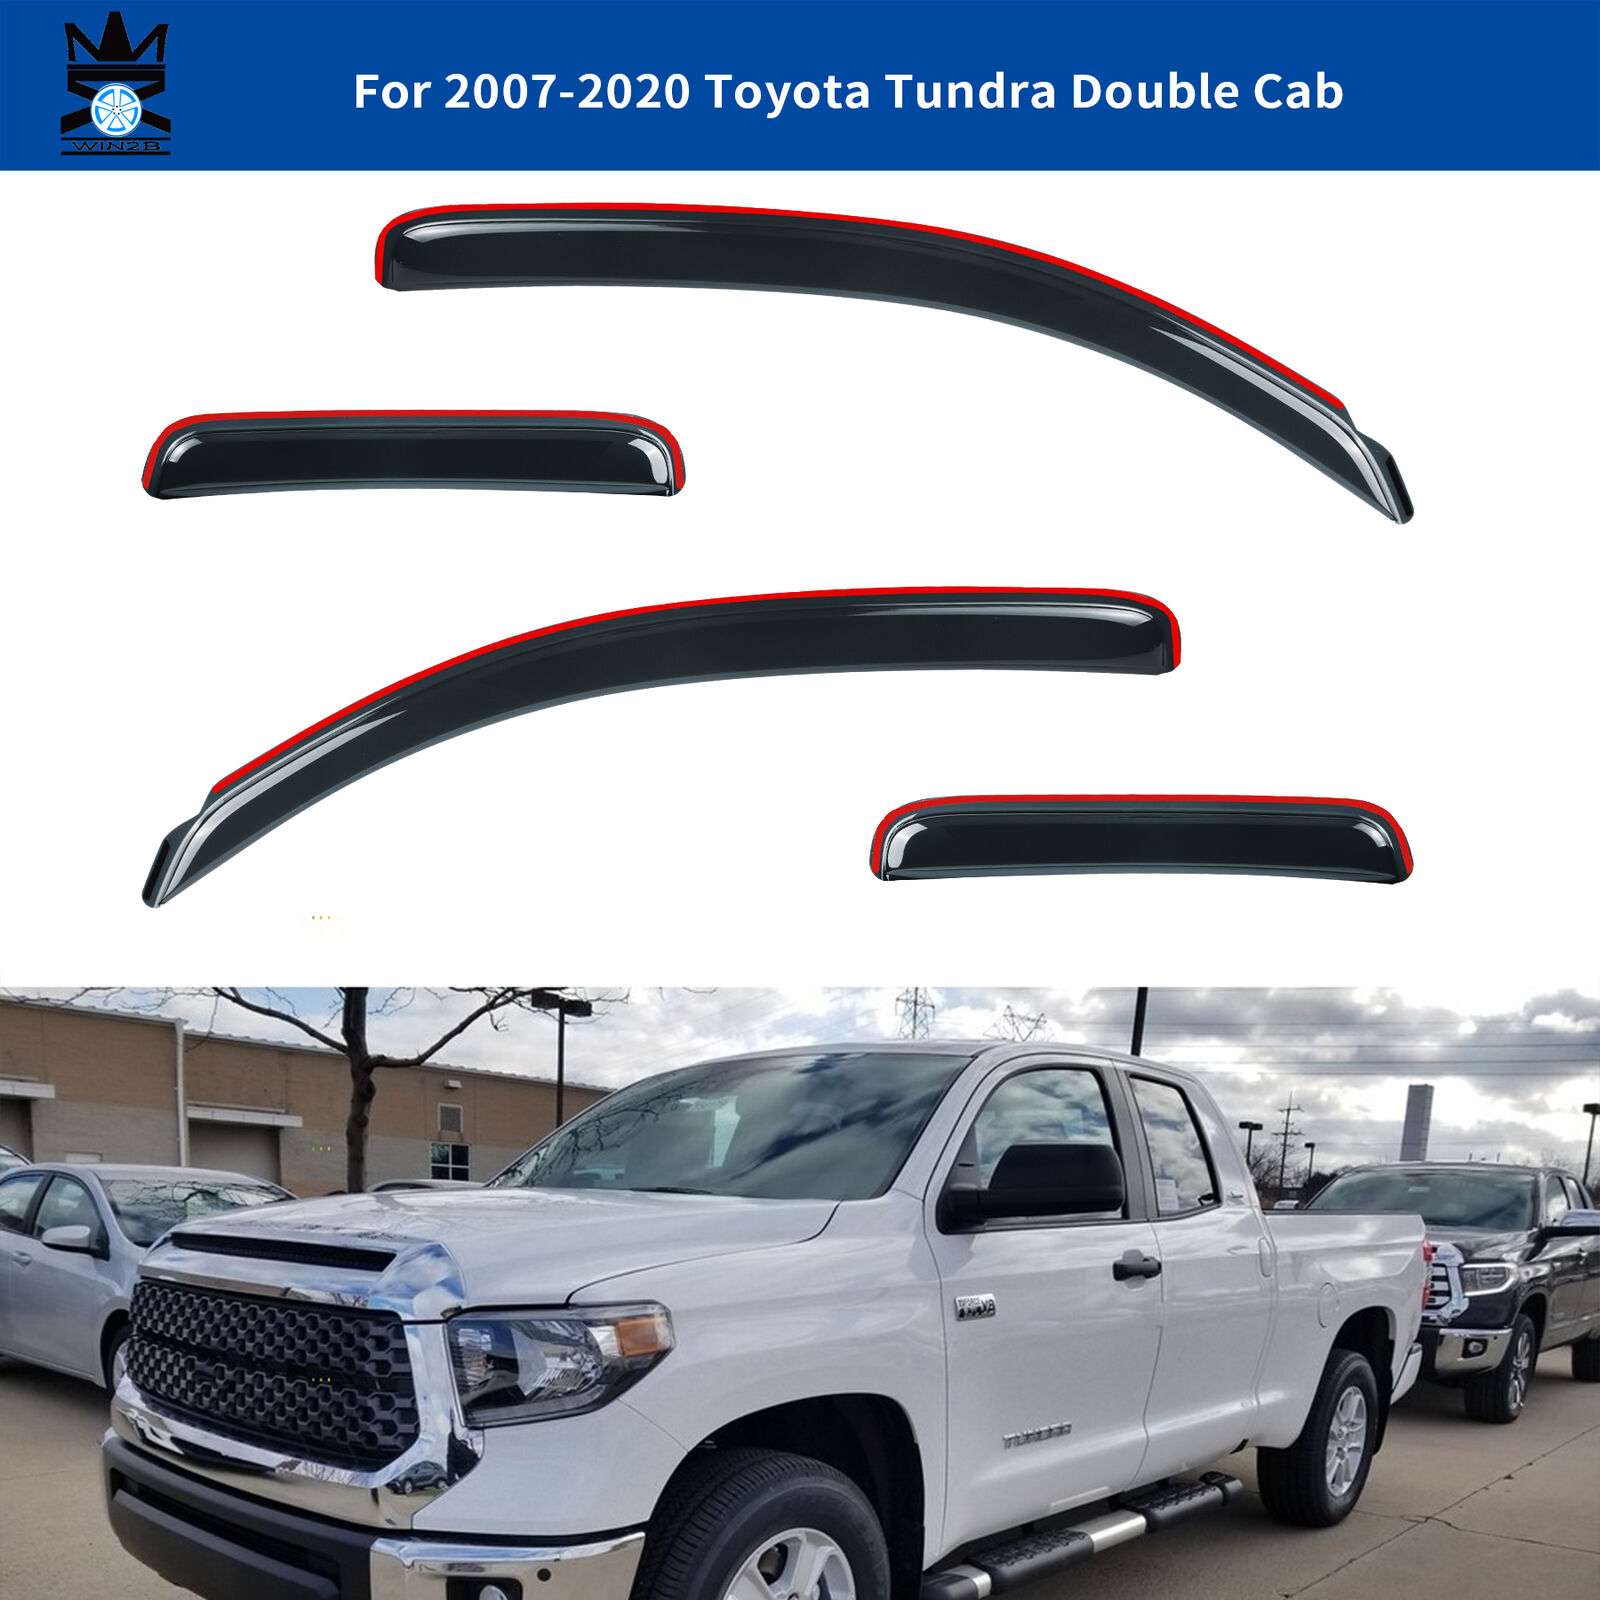 In-channel-mix Window Visors Deflector Rain Guards for 07-21 Tundra Extended Cab